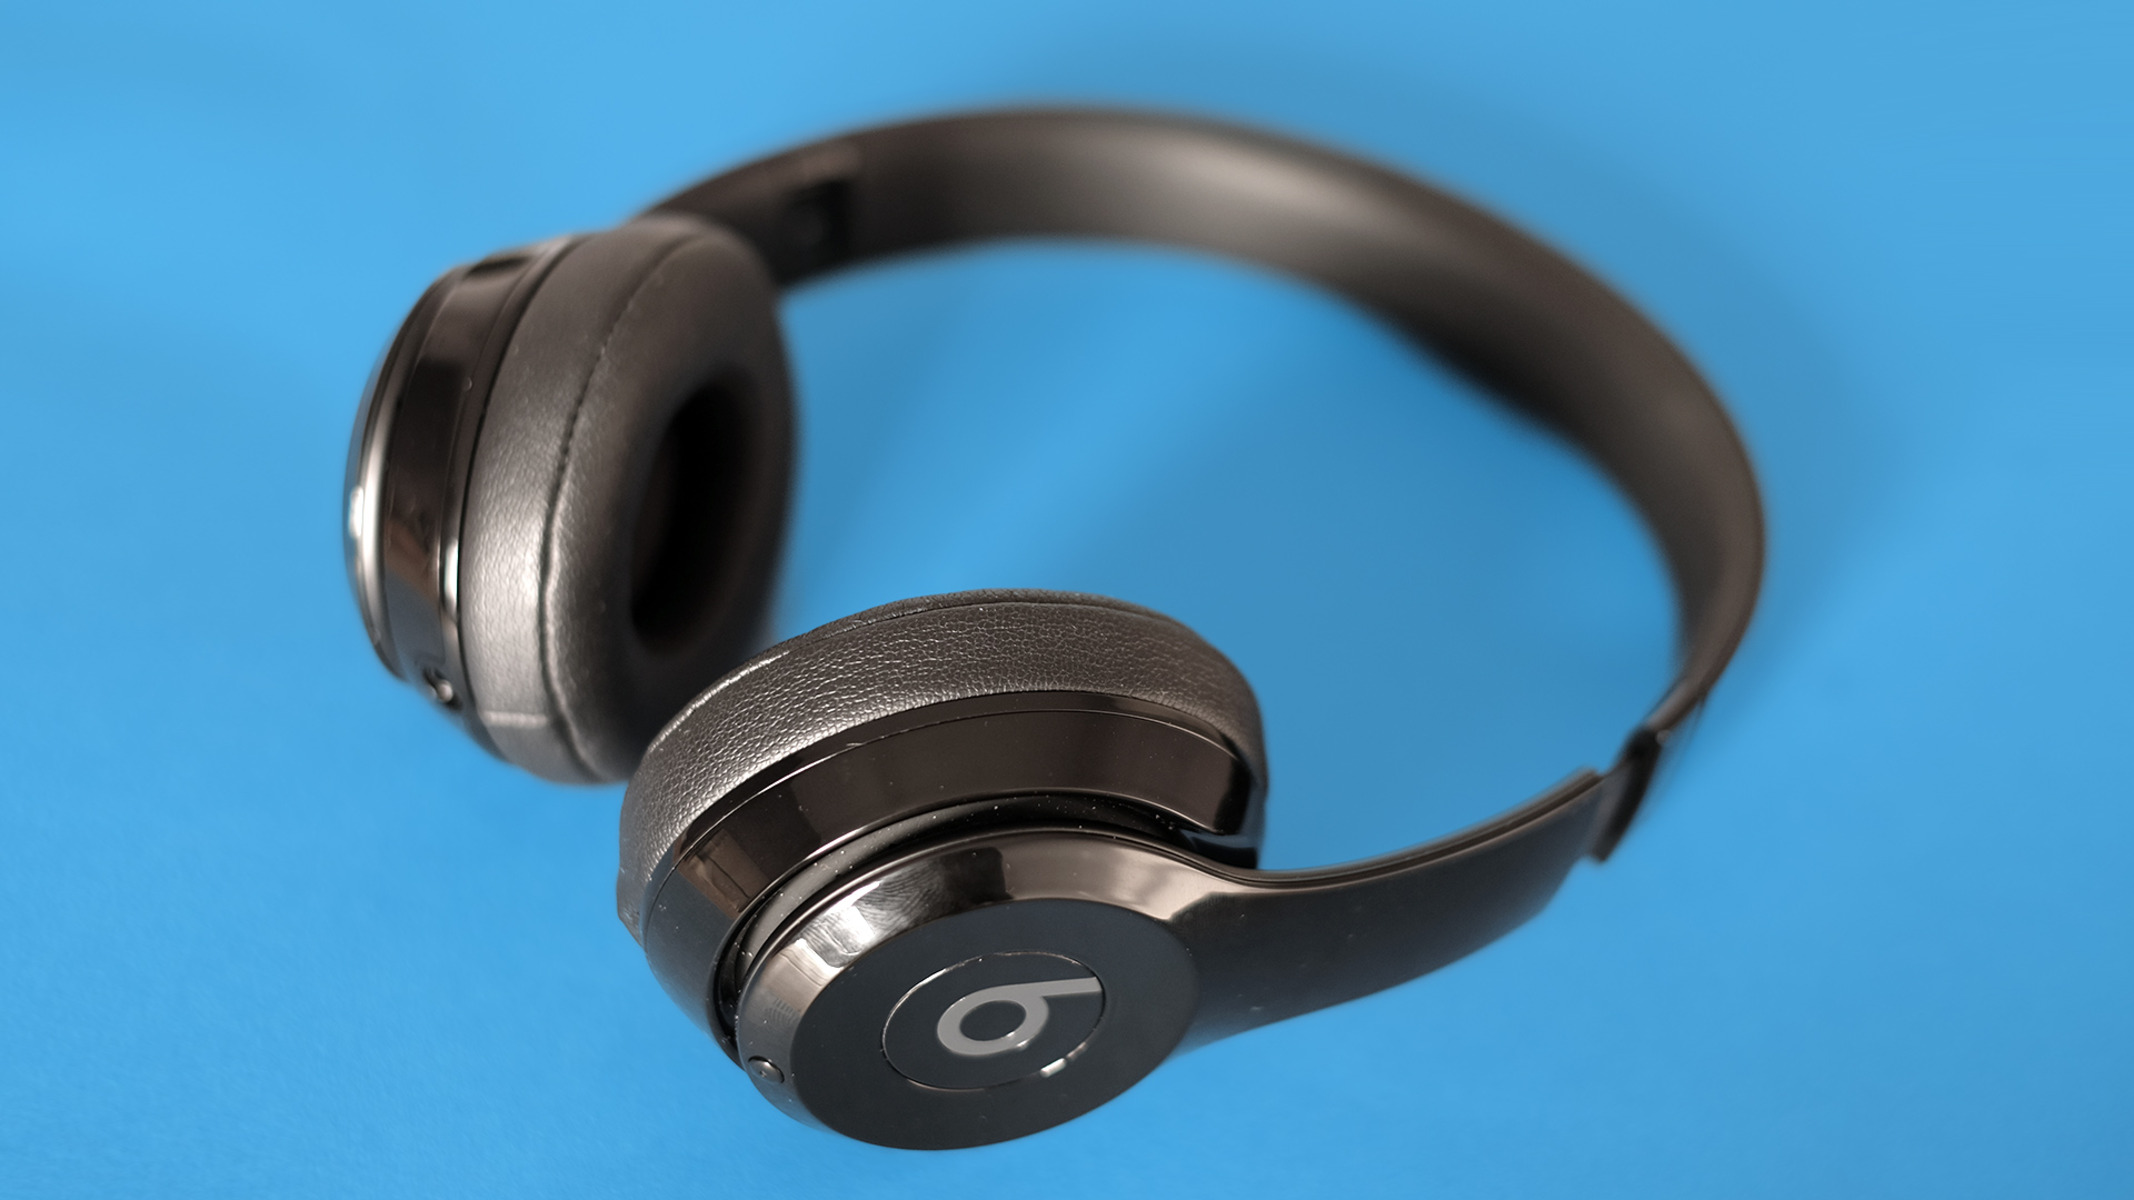 How To Activate Noise Cancelling On Beats Studio 3